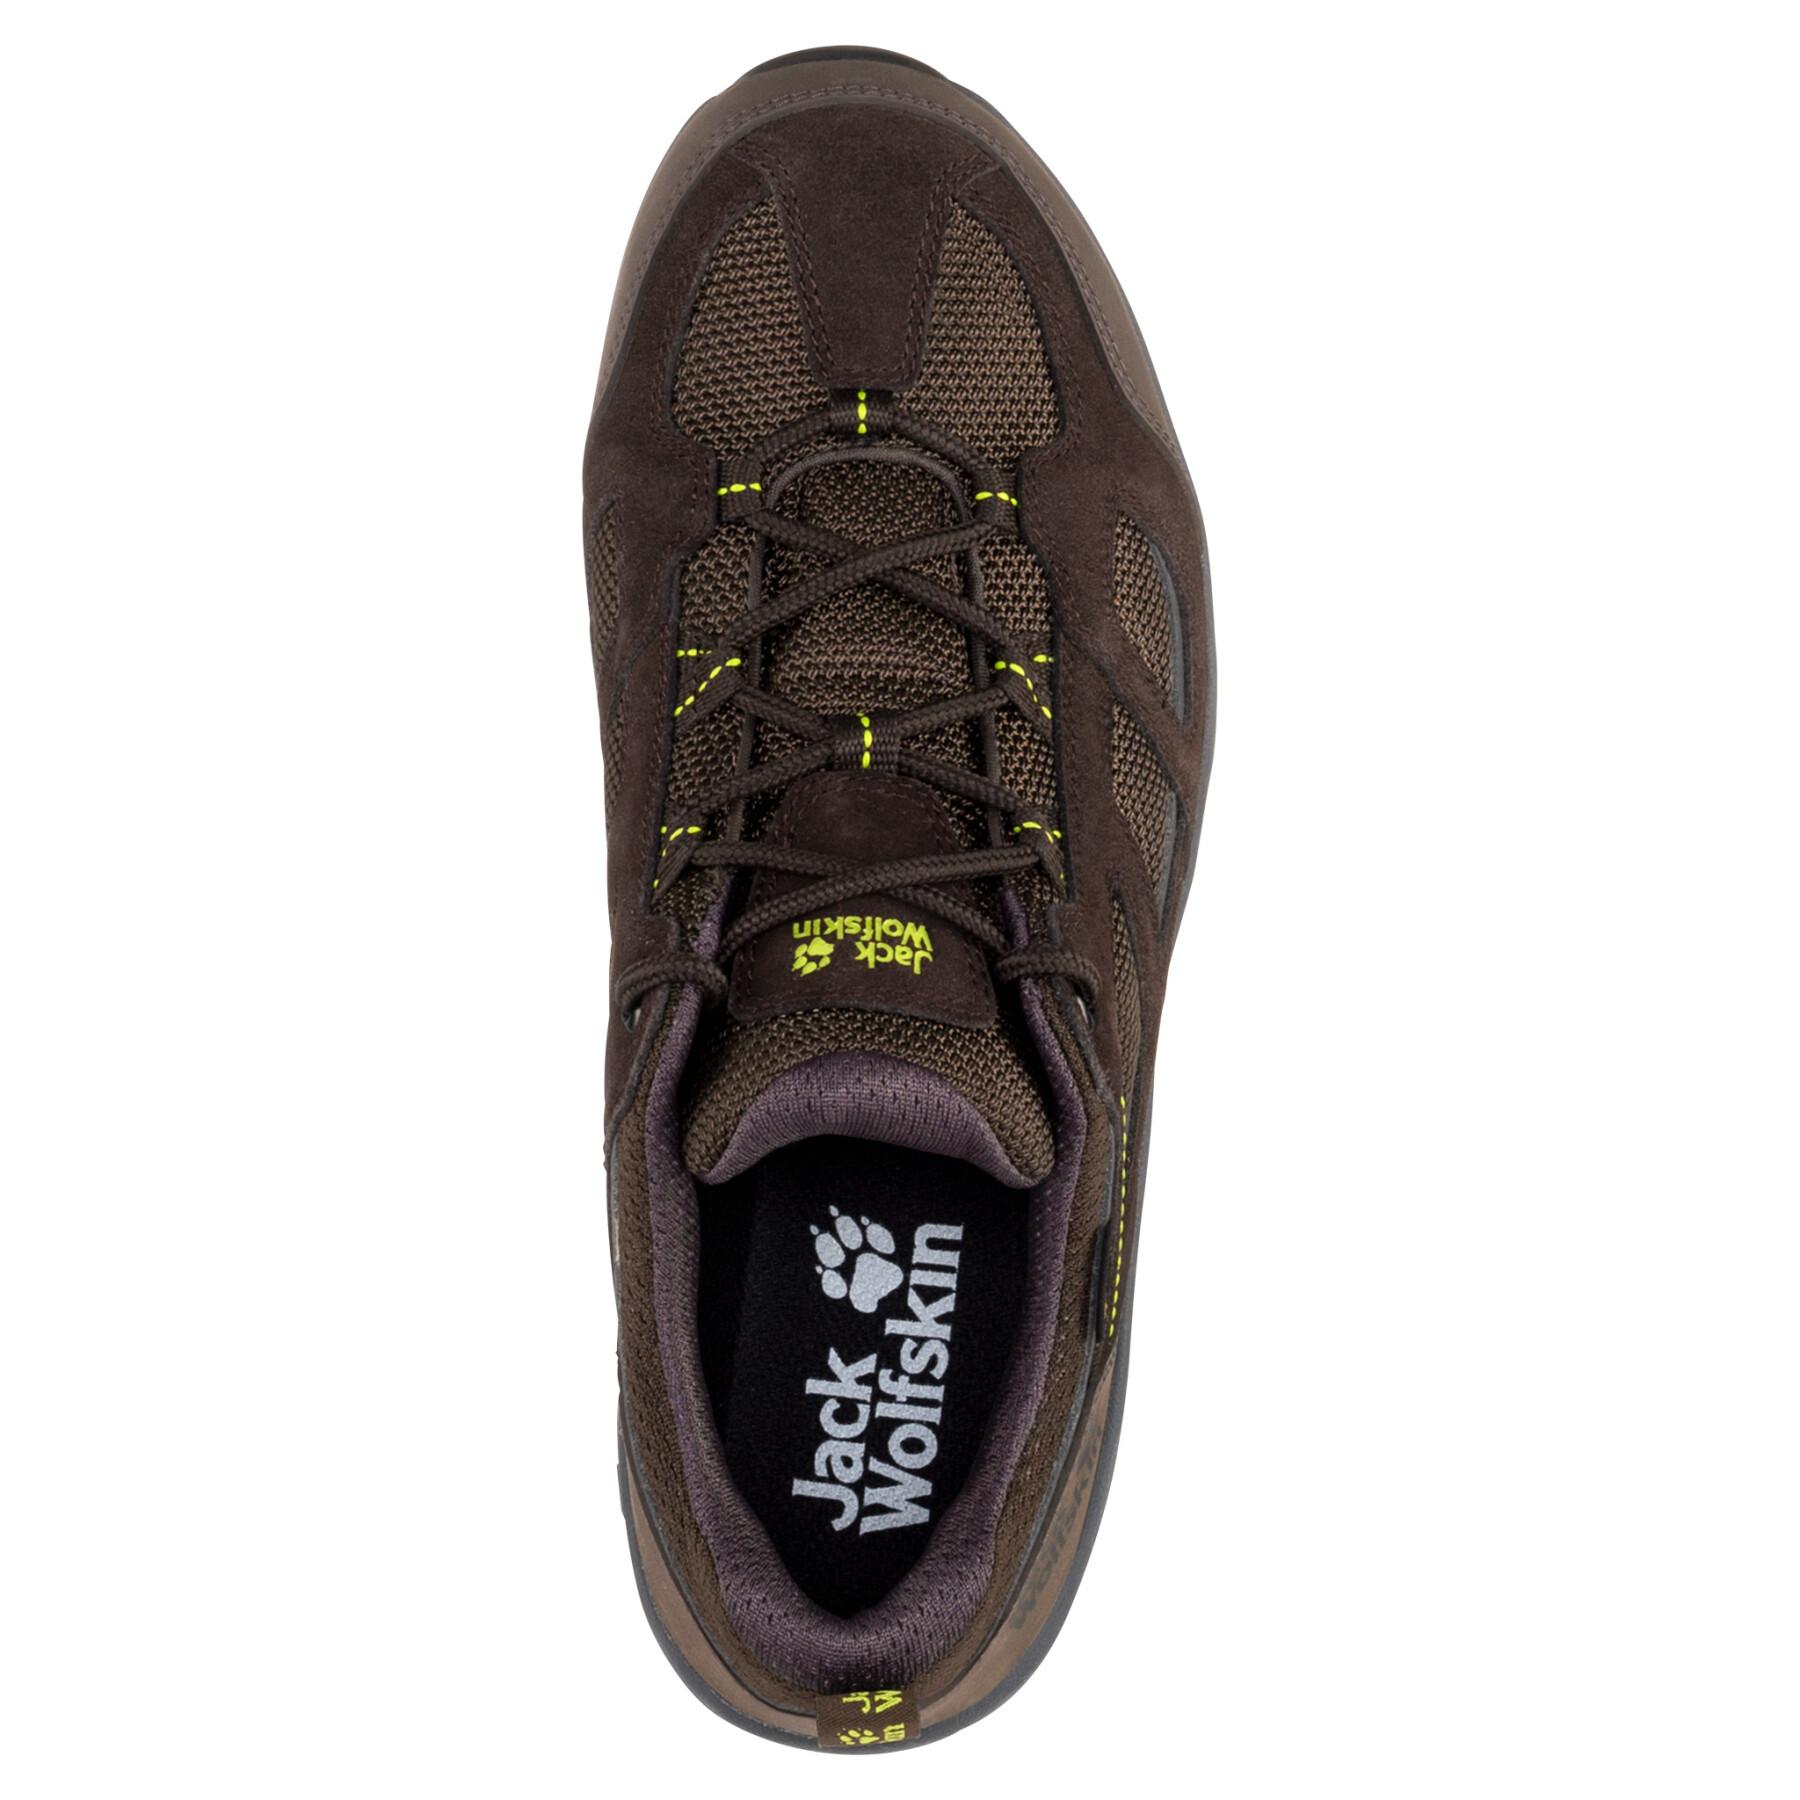 Hiking shoes Jack Wolfskin Vojo 3 Texapore Low